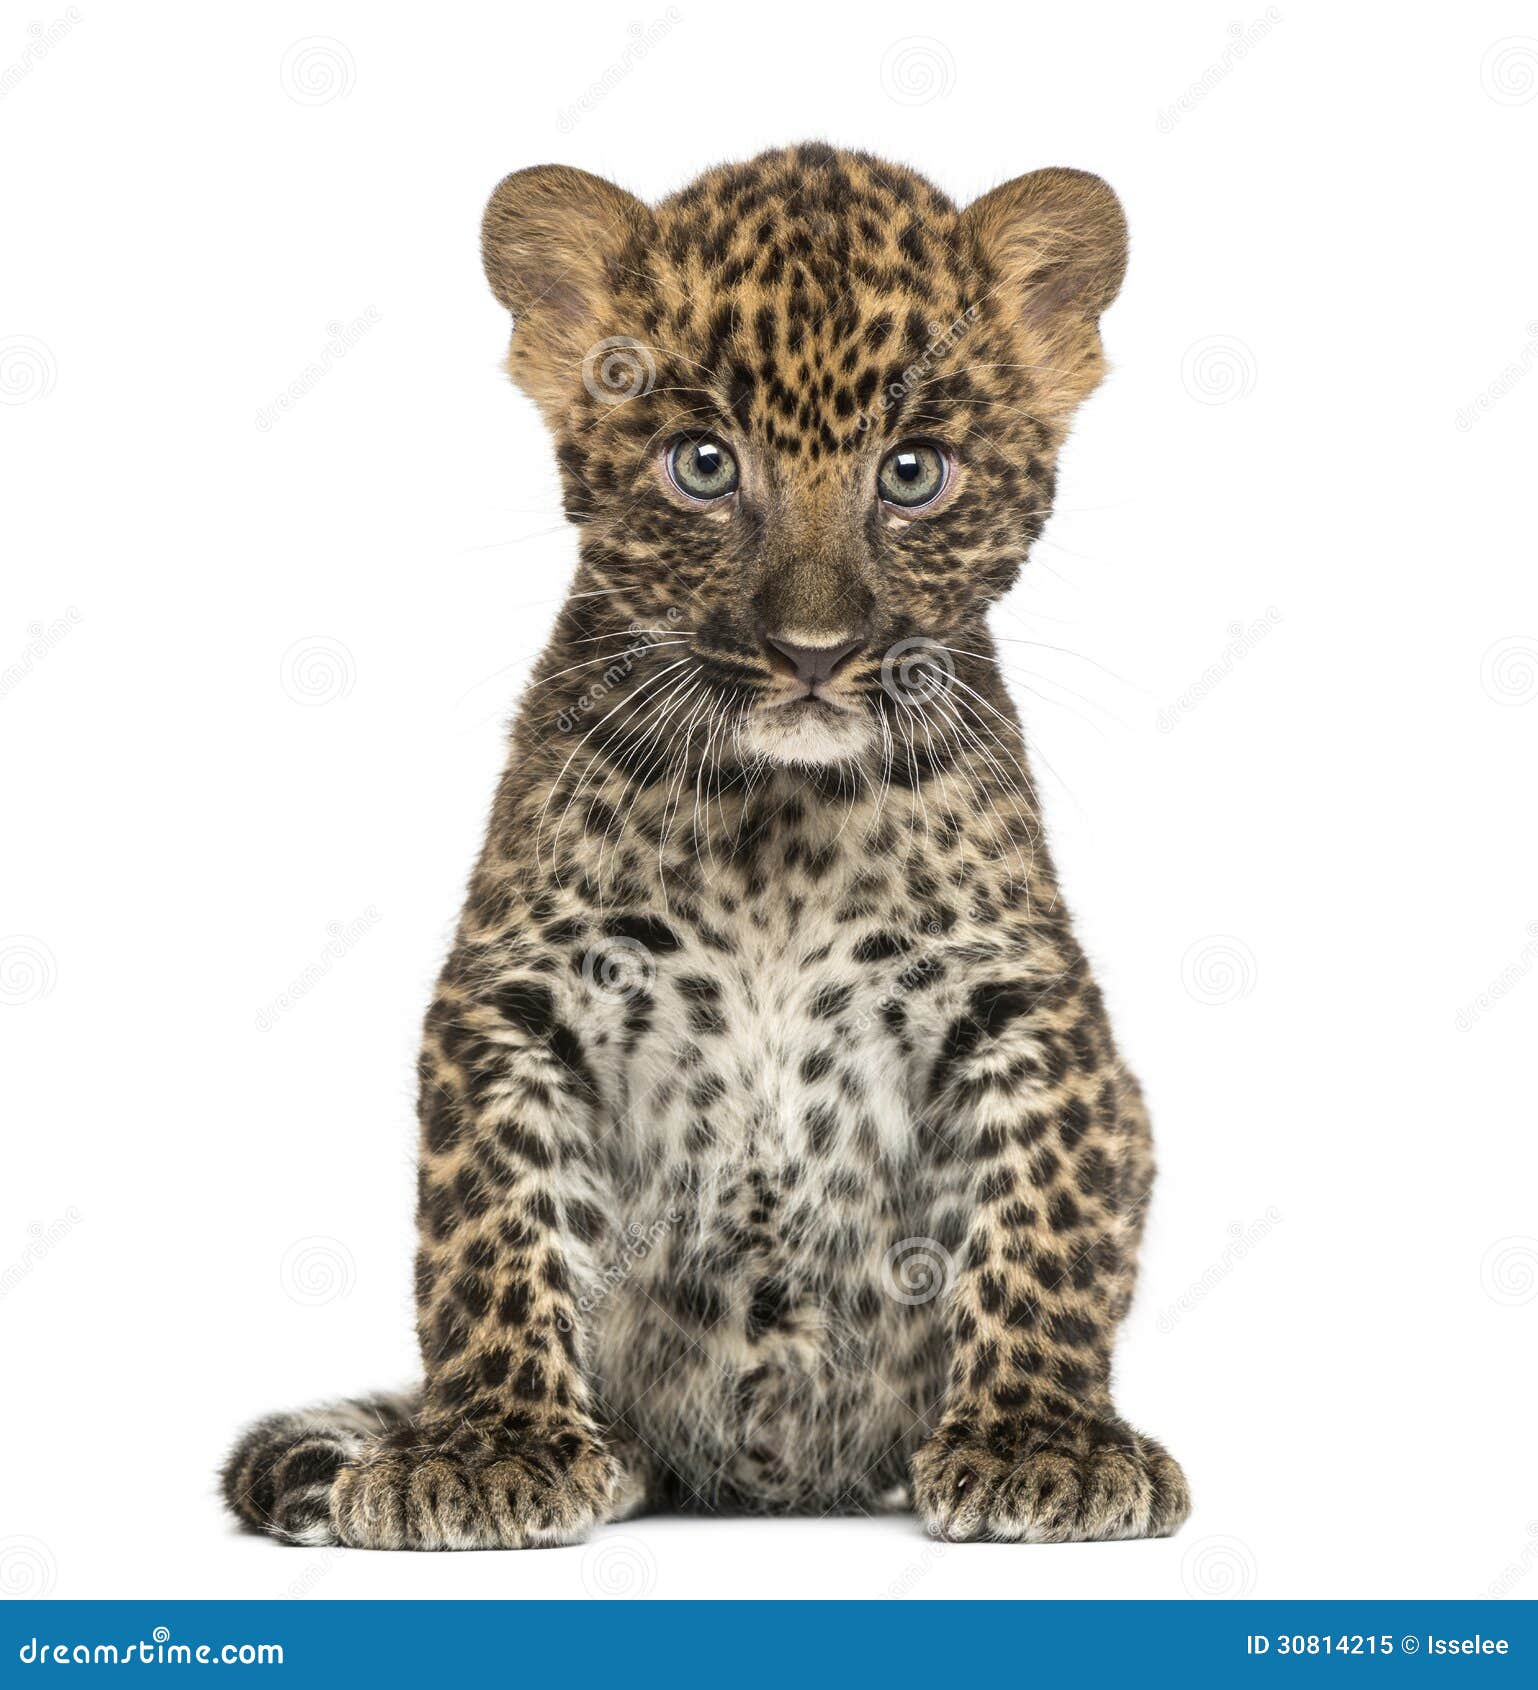 spotted leopard cub sitting - panthera pardus, 7 weeks old